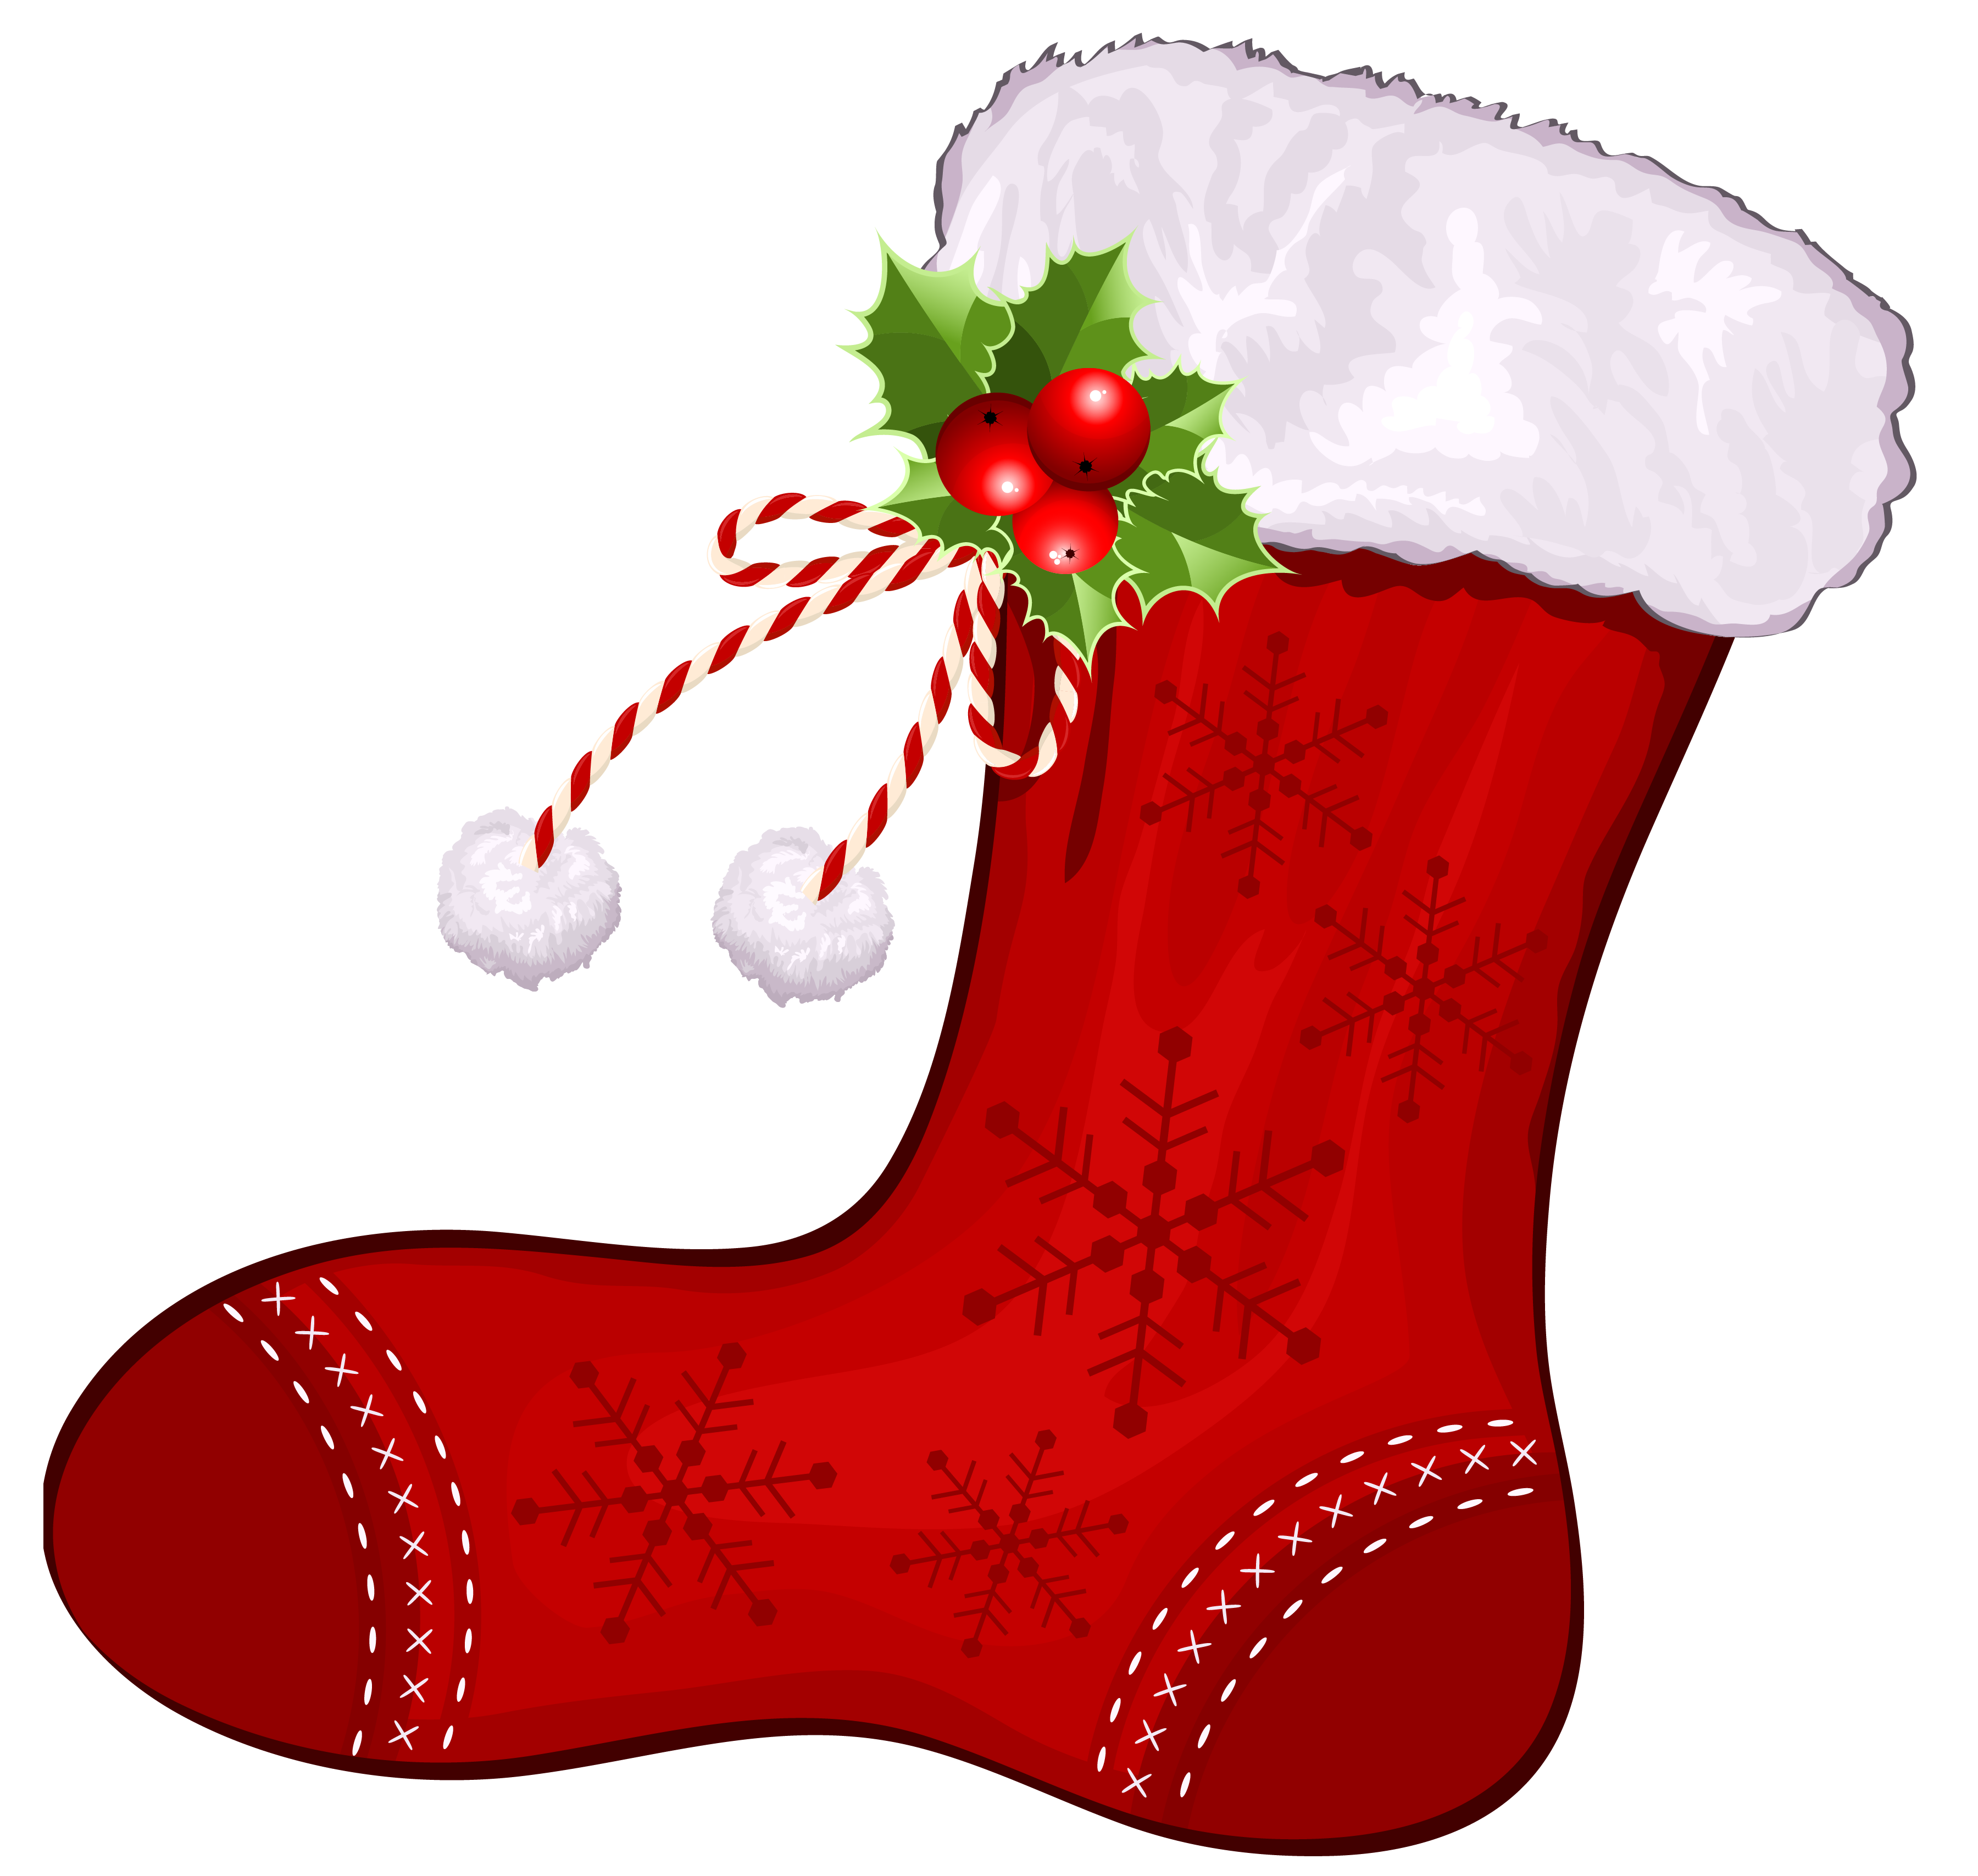 view all Christmas Stocking Png). 